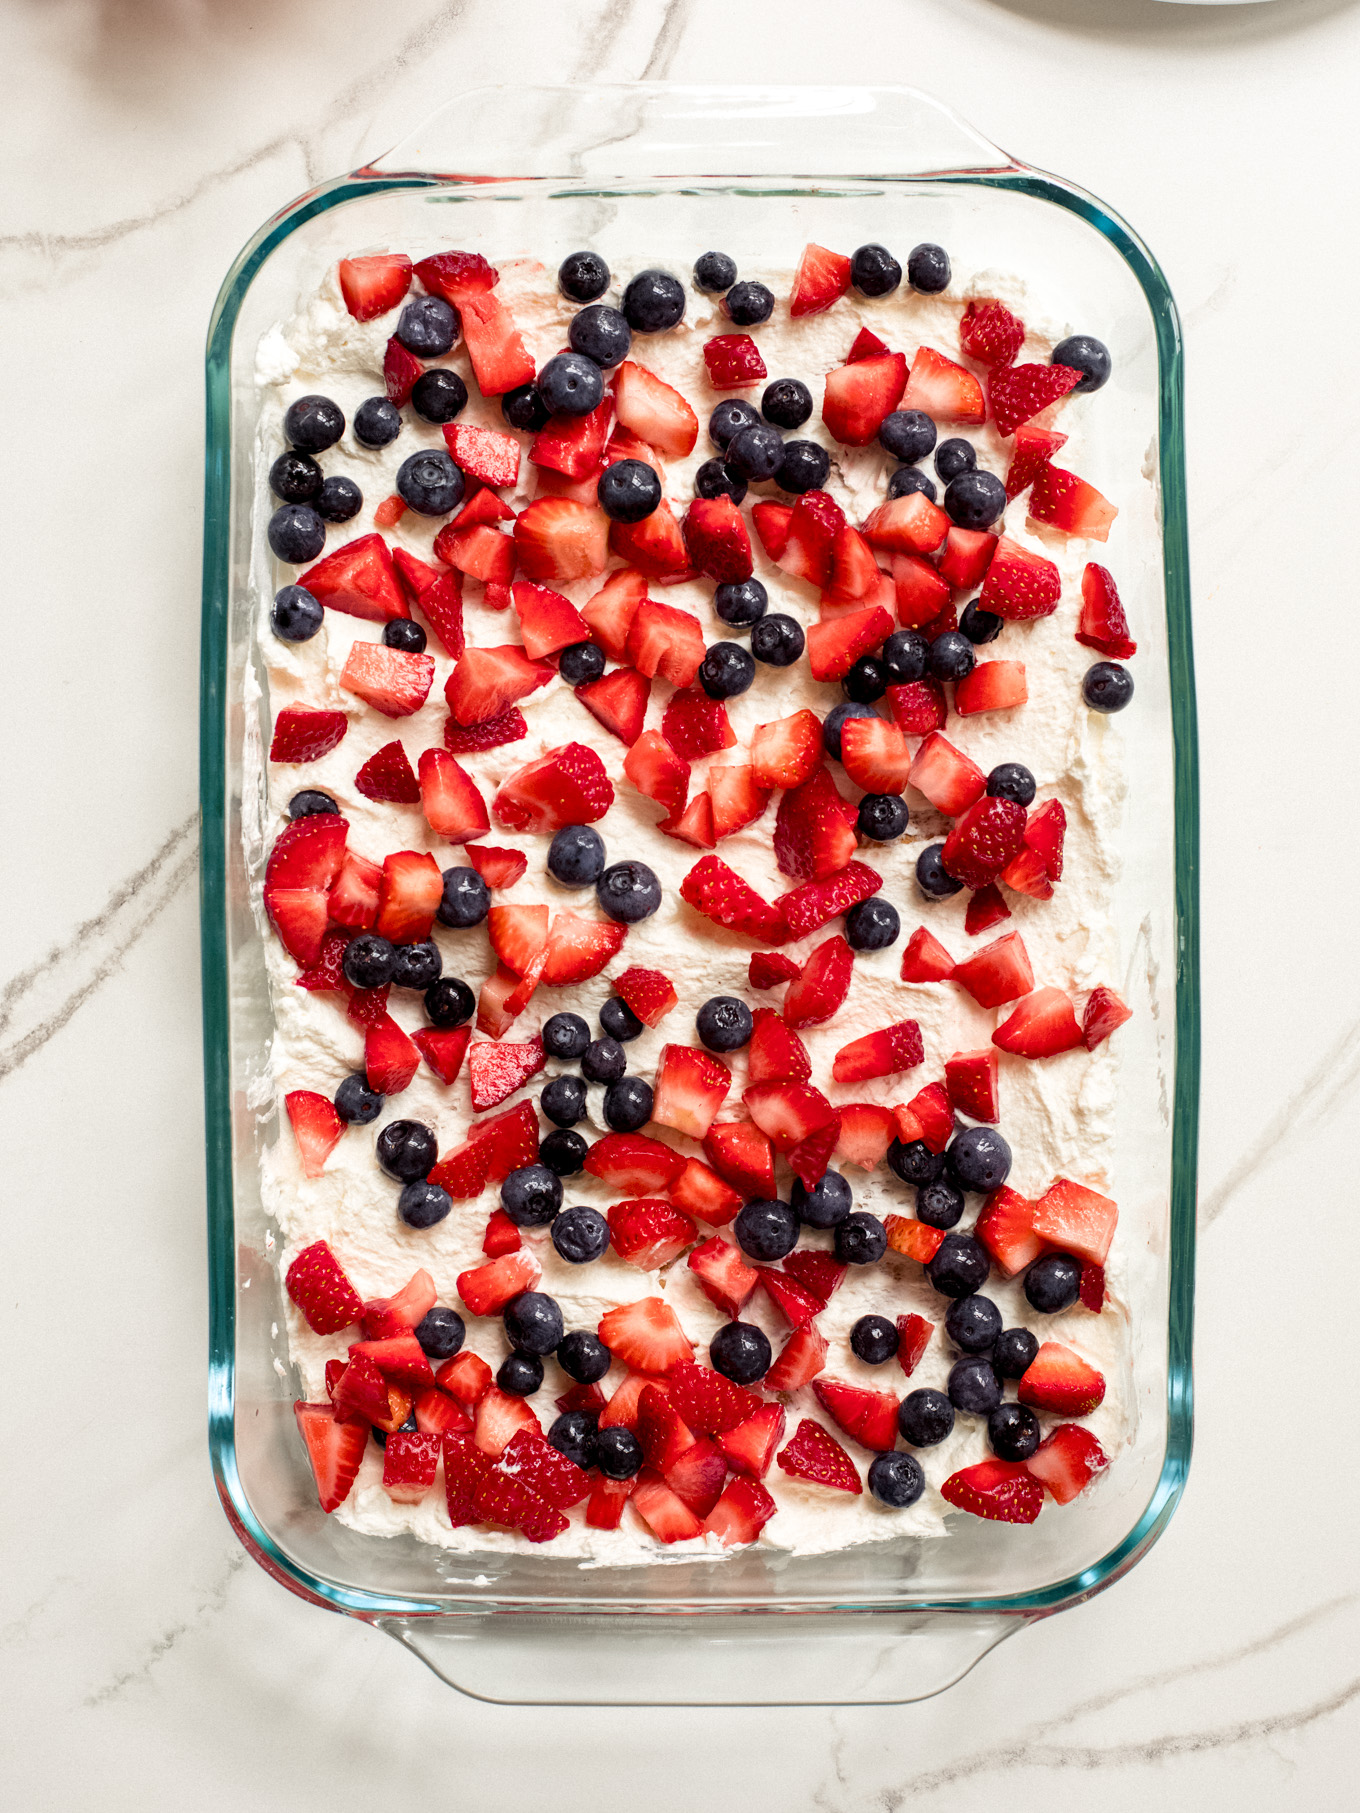 Layered cream and chopped up fruit in a glass baking dish.